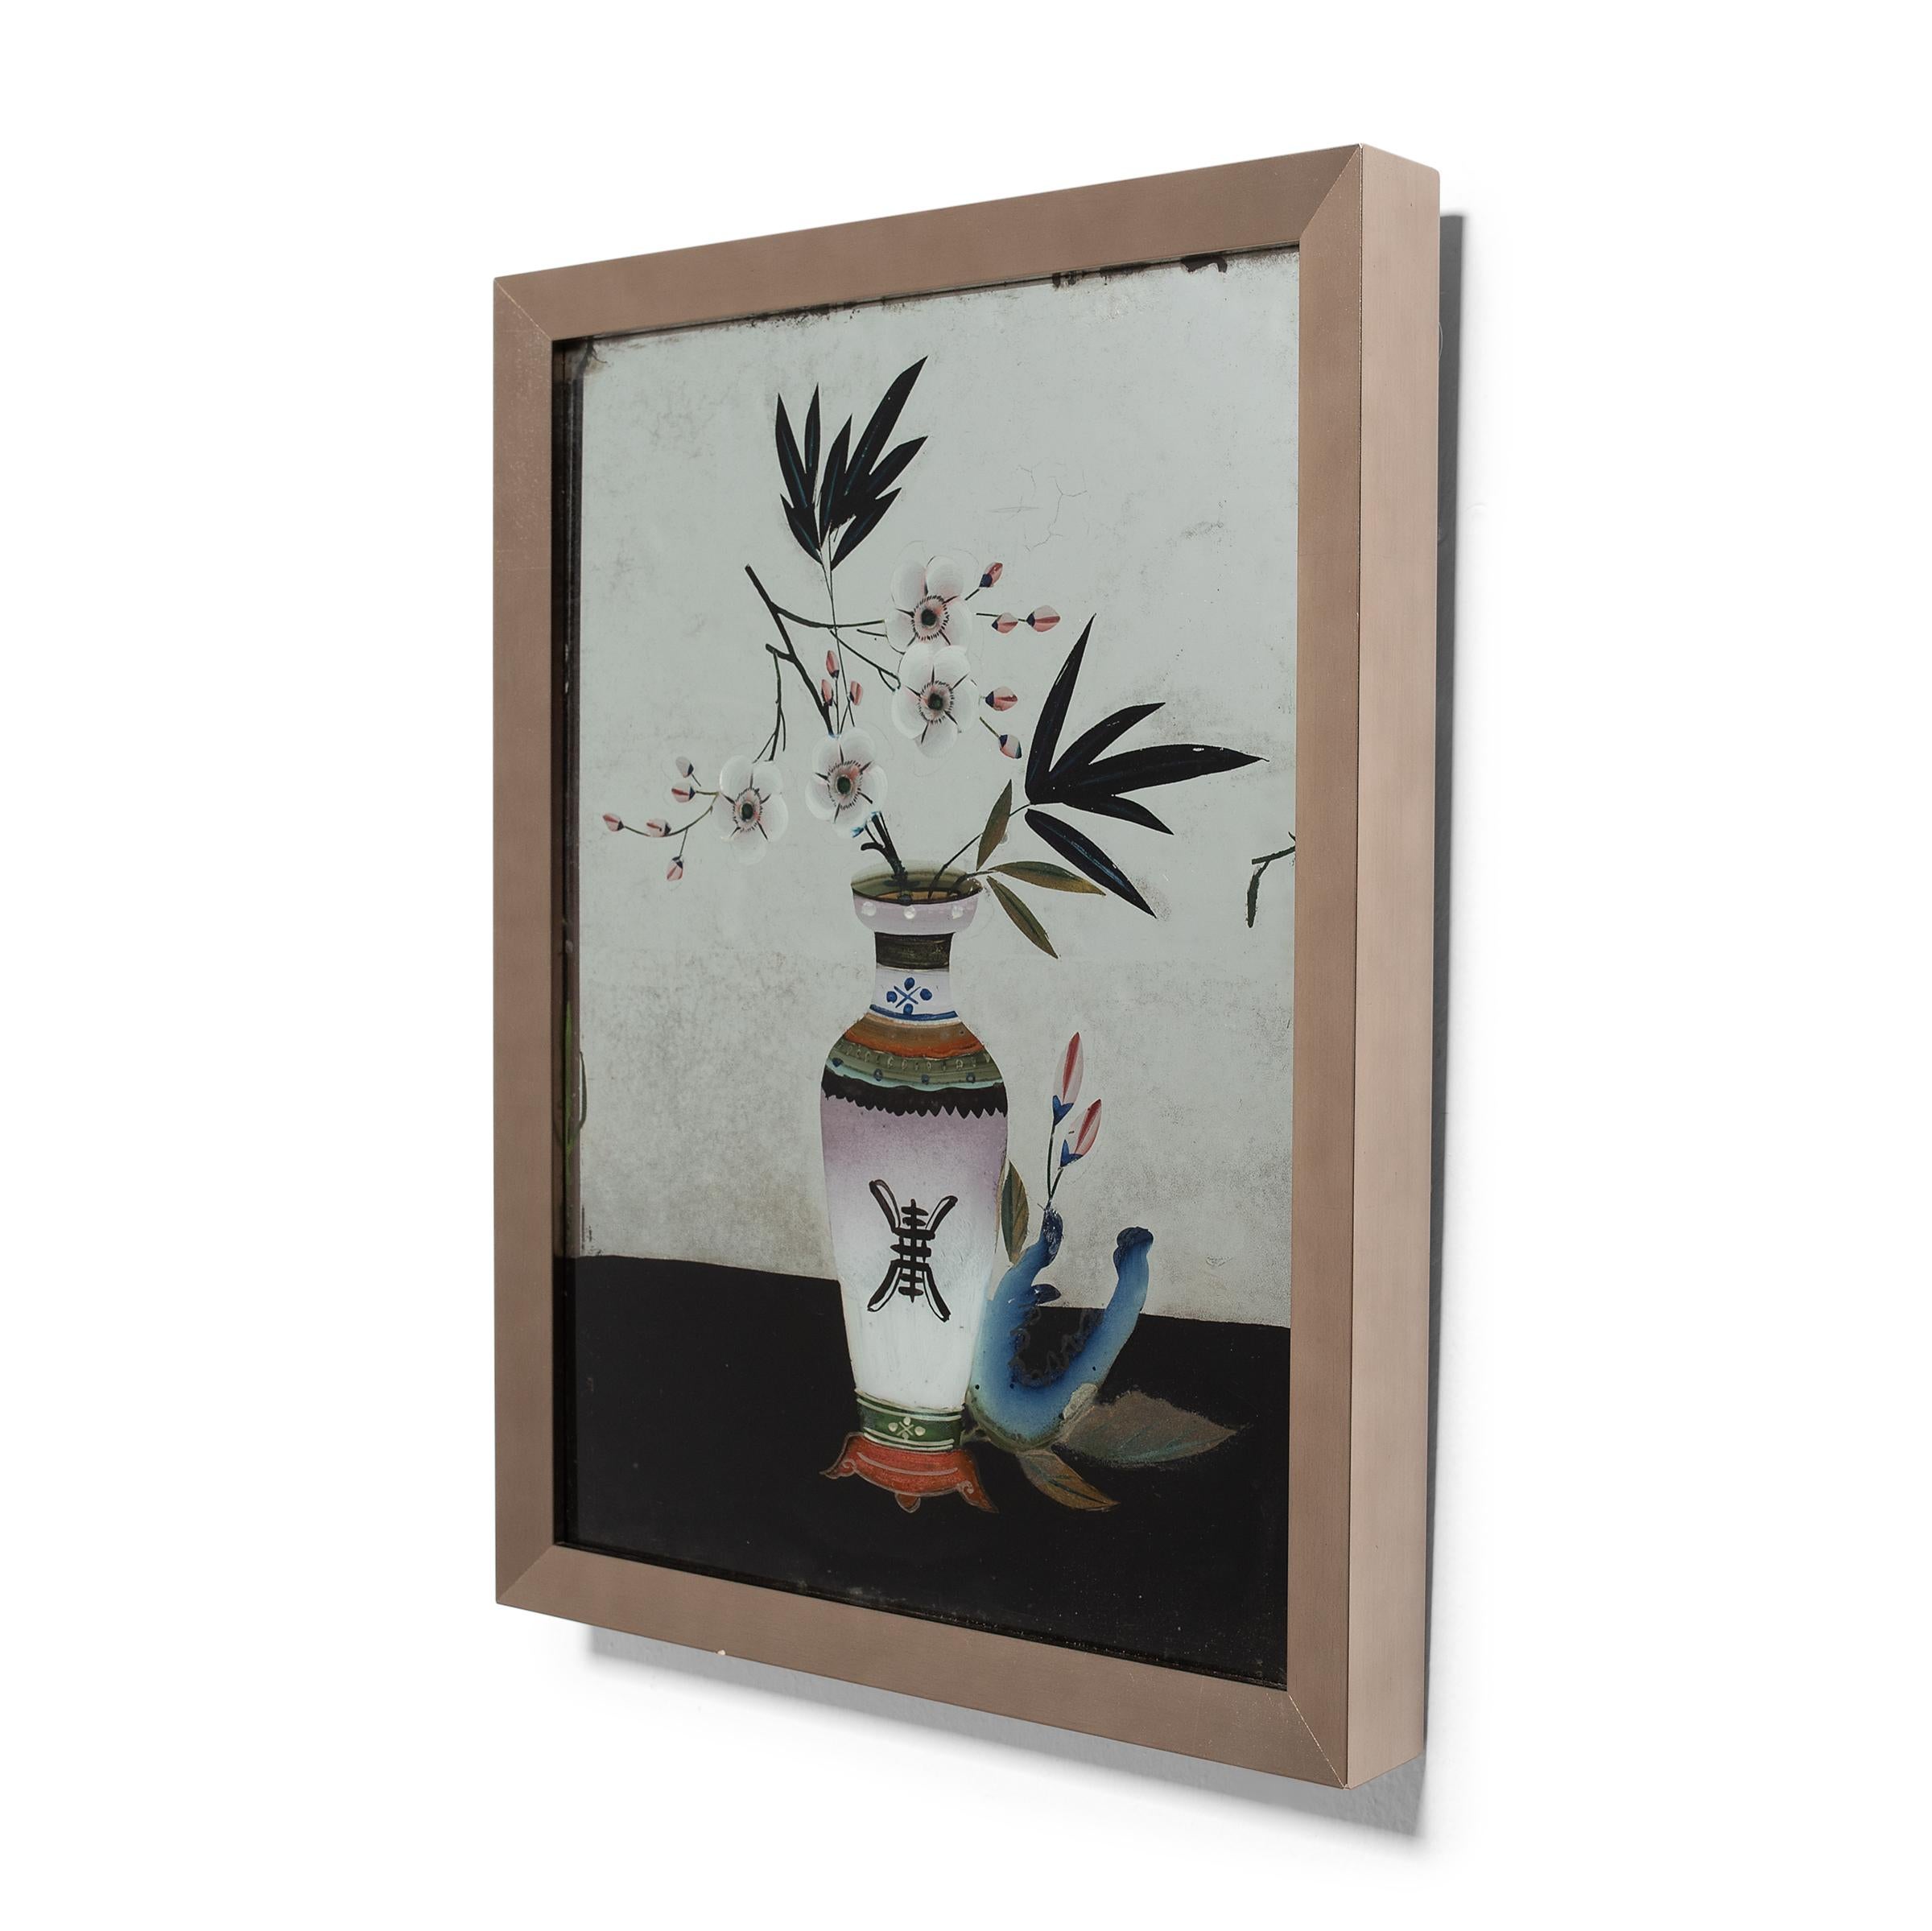 This colorful floral still life is a charming example of Chinese reverse glass painting. Popularized during the Qing dynasty, reverse glass painting requires an artist to essentially work backwards, starting with details and shading before adding